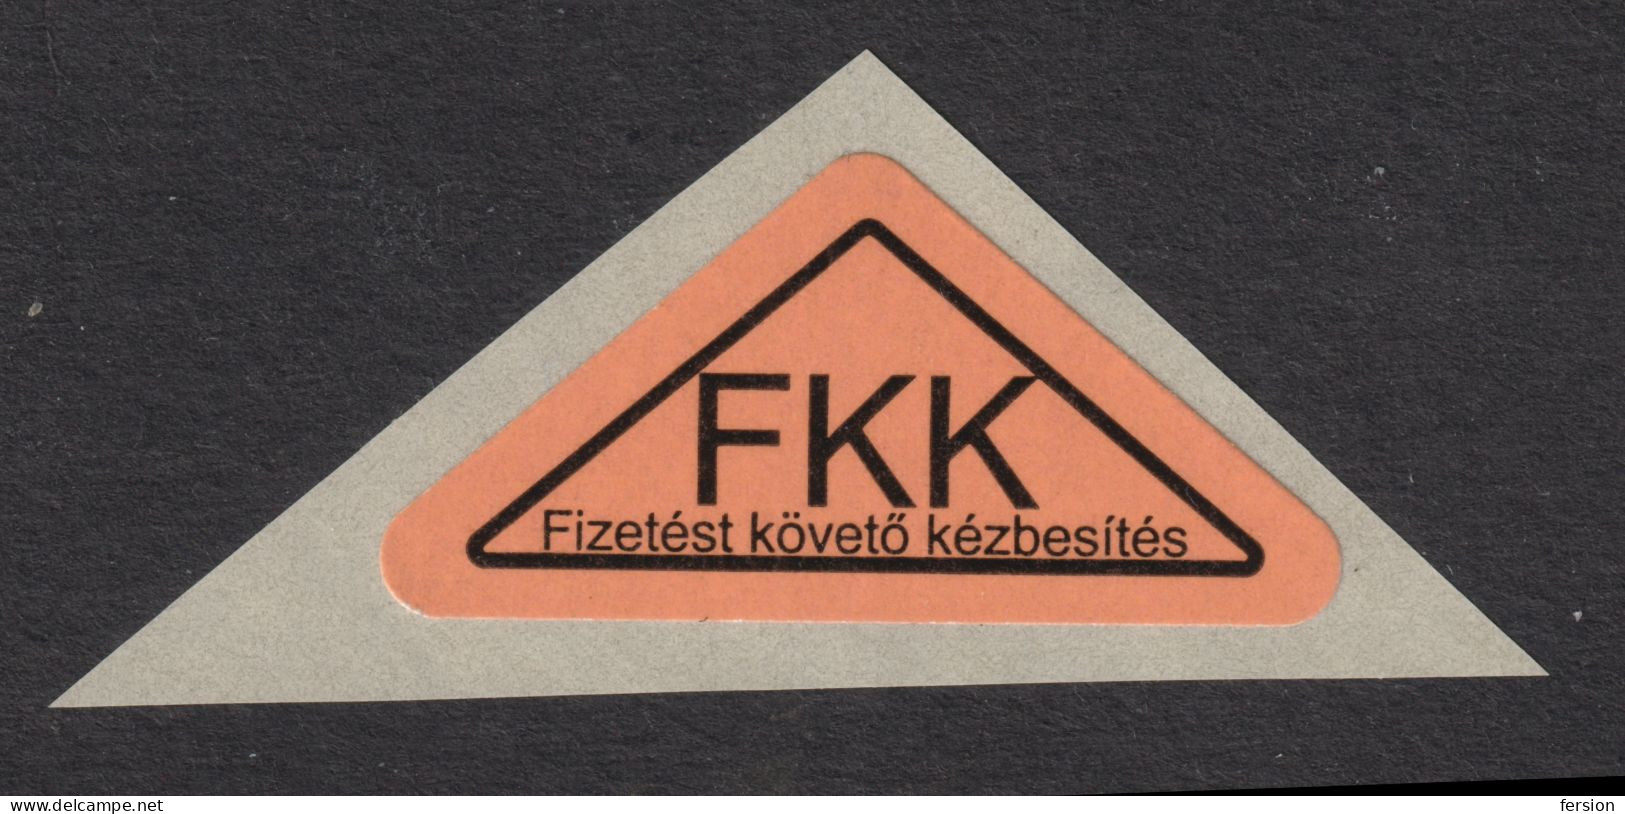 Postal LABEL - Delivery After Payment " Remboursement " FKK - Self Adhesive Vignette Label - 2020 Hungary - MNH - Automatenmarken [ATM]